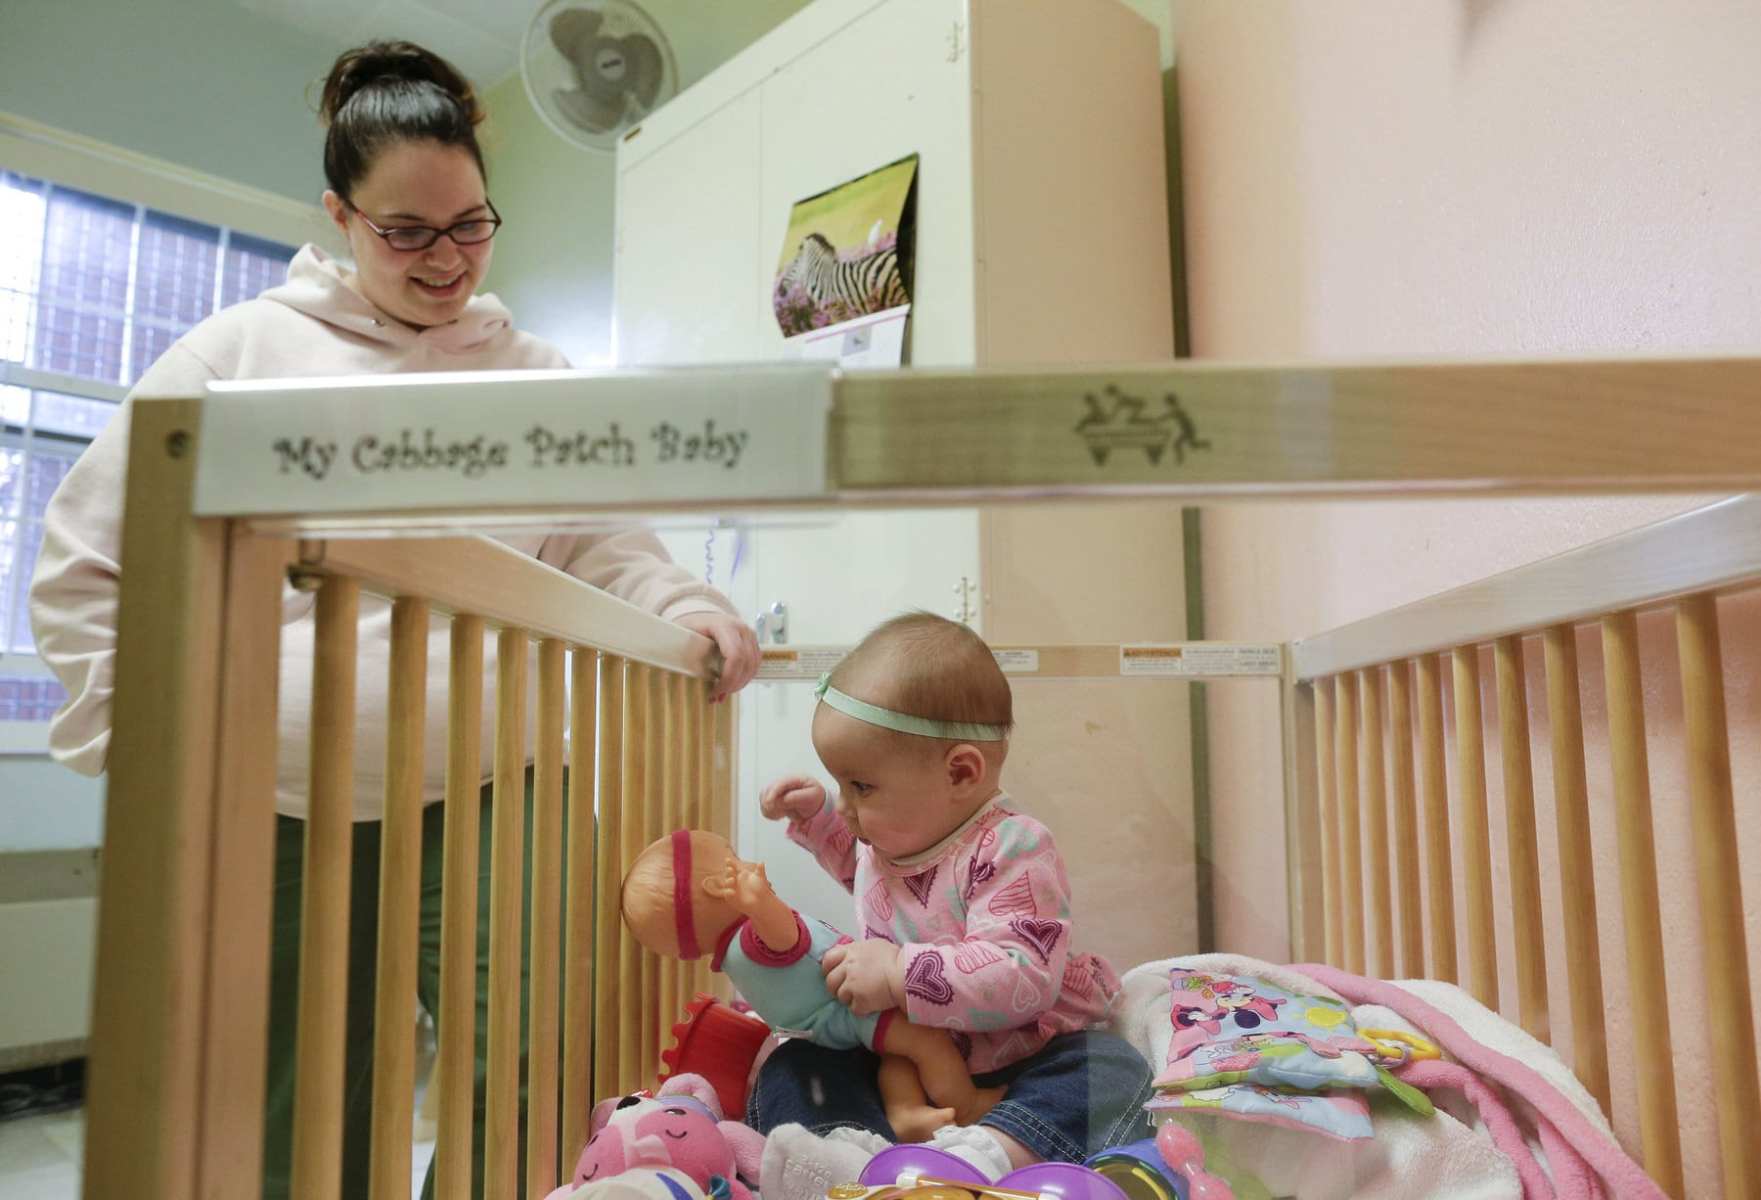 A mother watches over her daughter as she plays in her crib inside her room at a correctional facility.